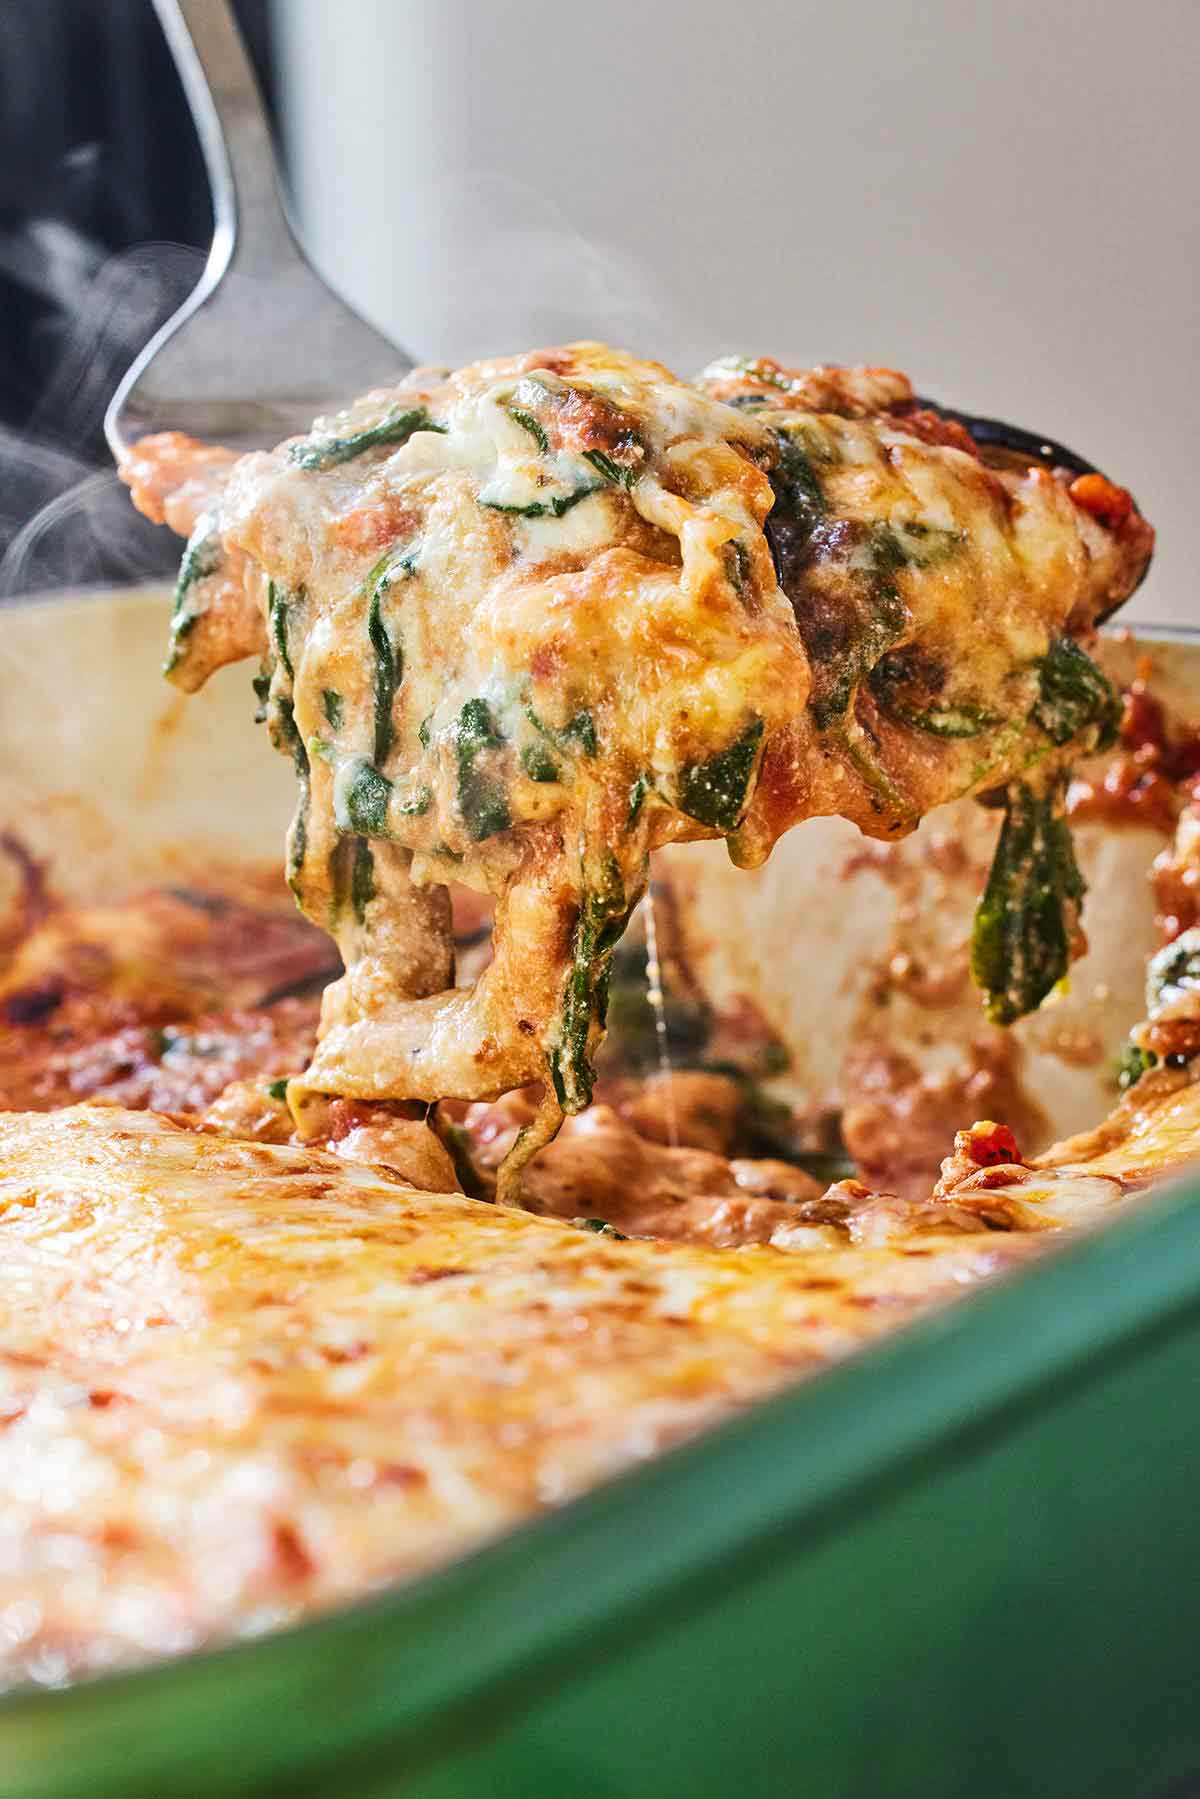 A serving of eggplant lasagna lifted from the casserole dish.